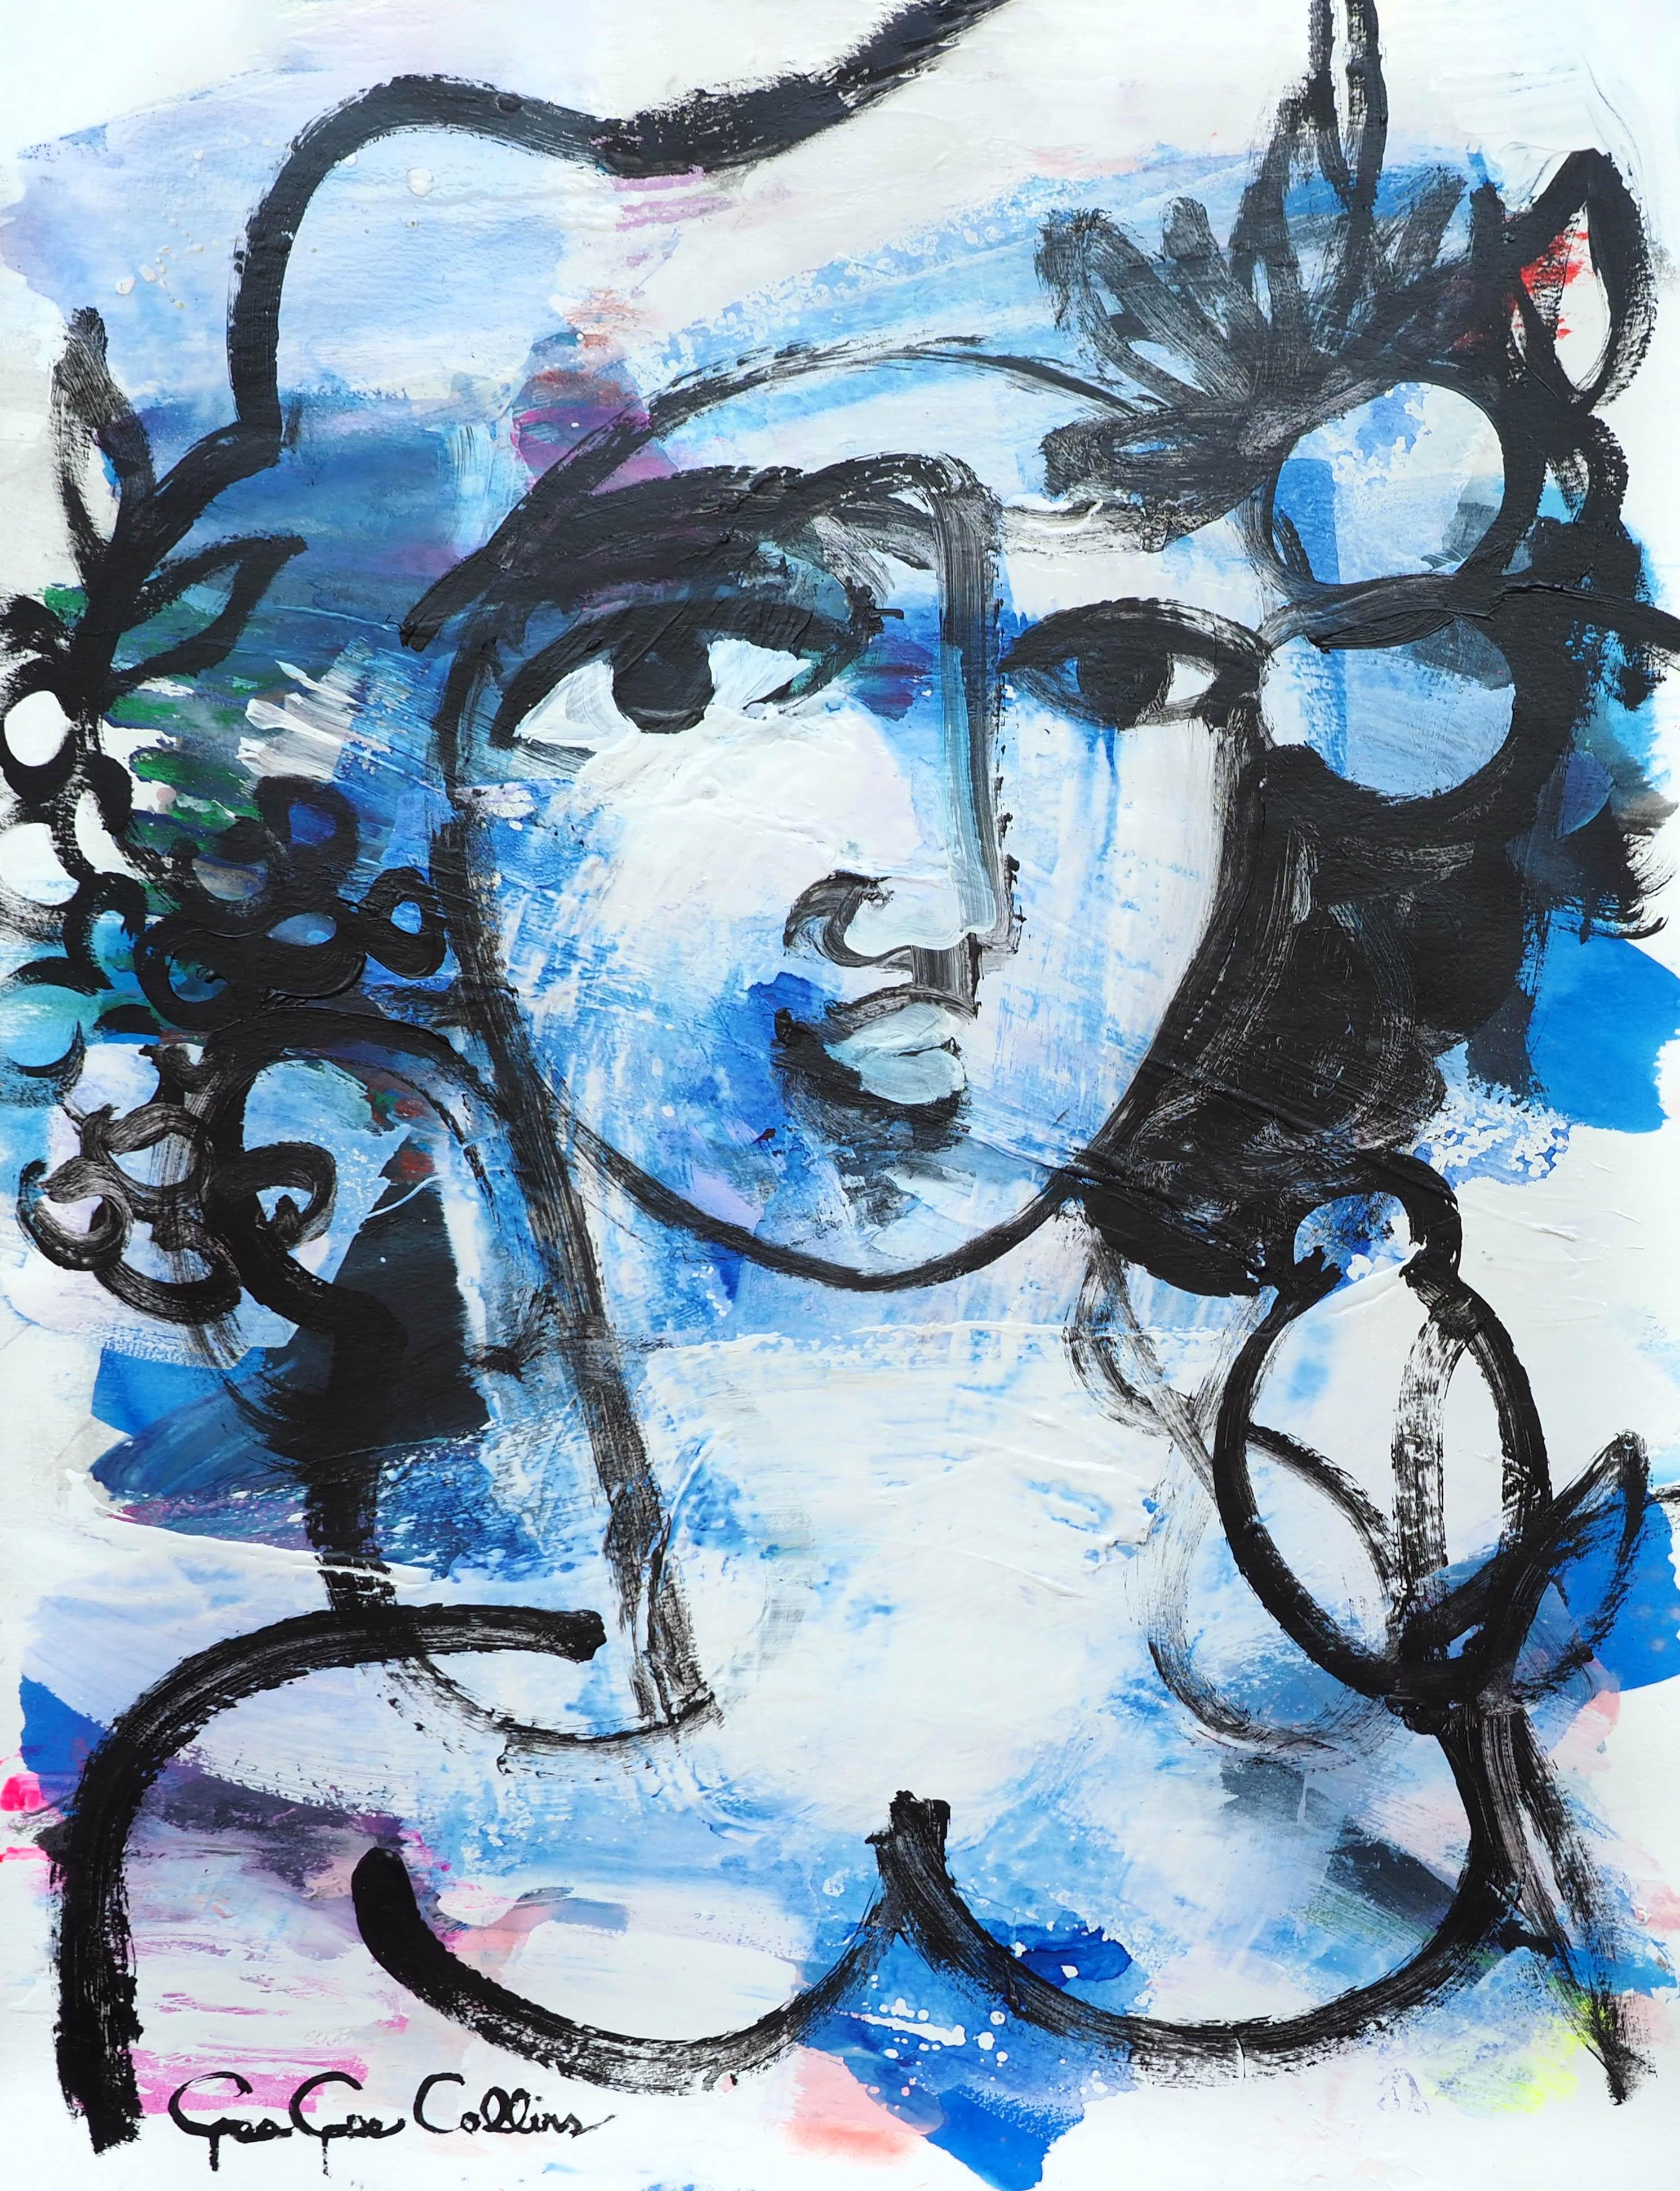 Feeling Blue - Mixed Media Art by Gee Gee Collins